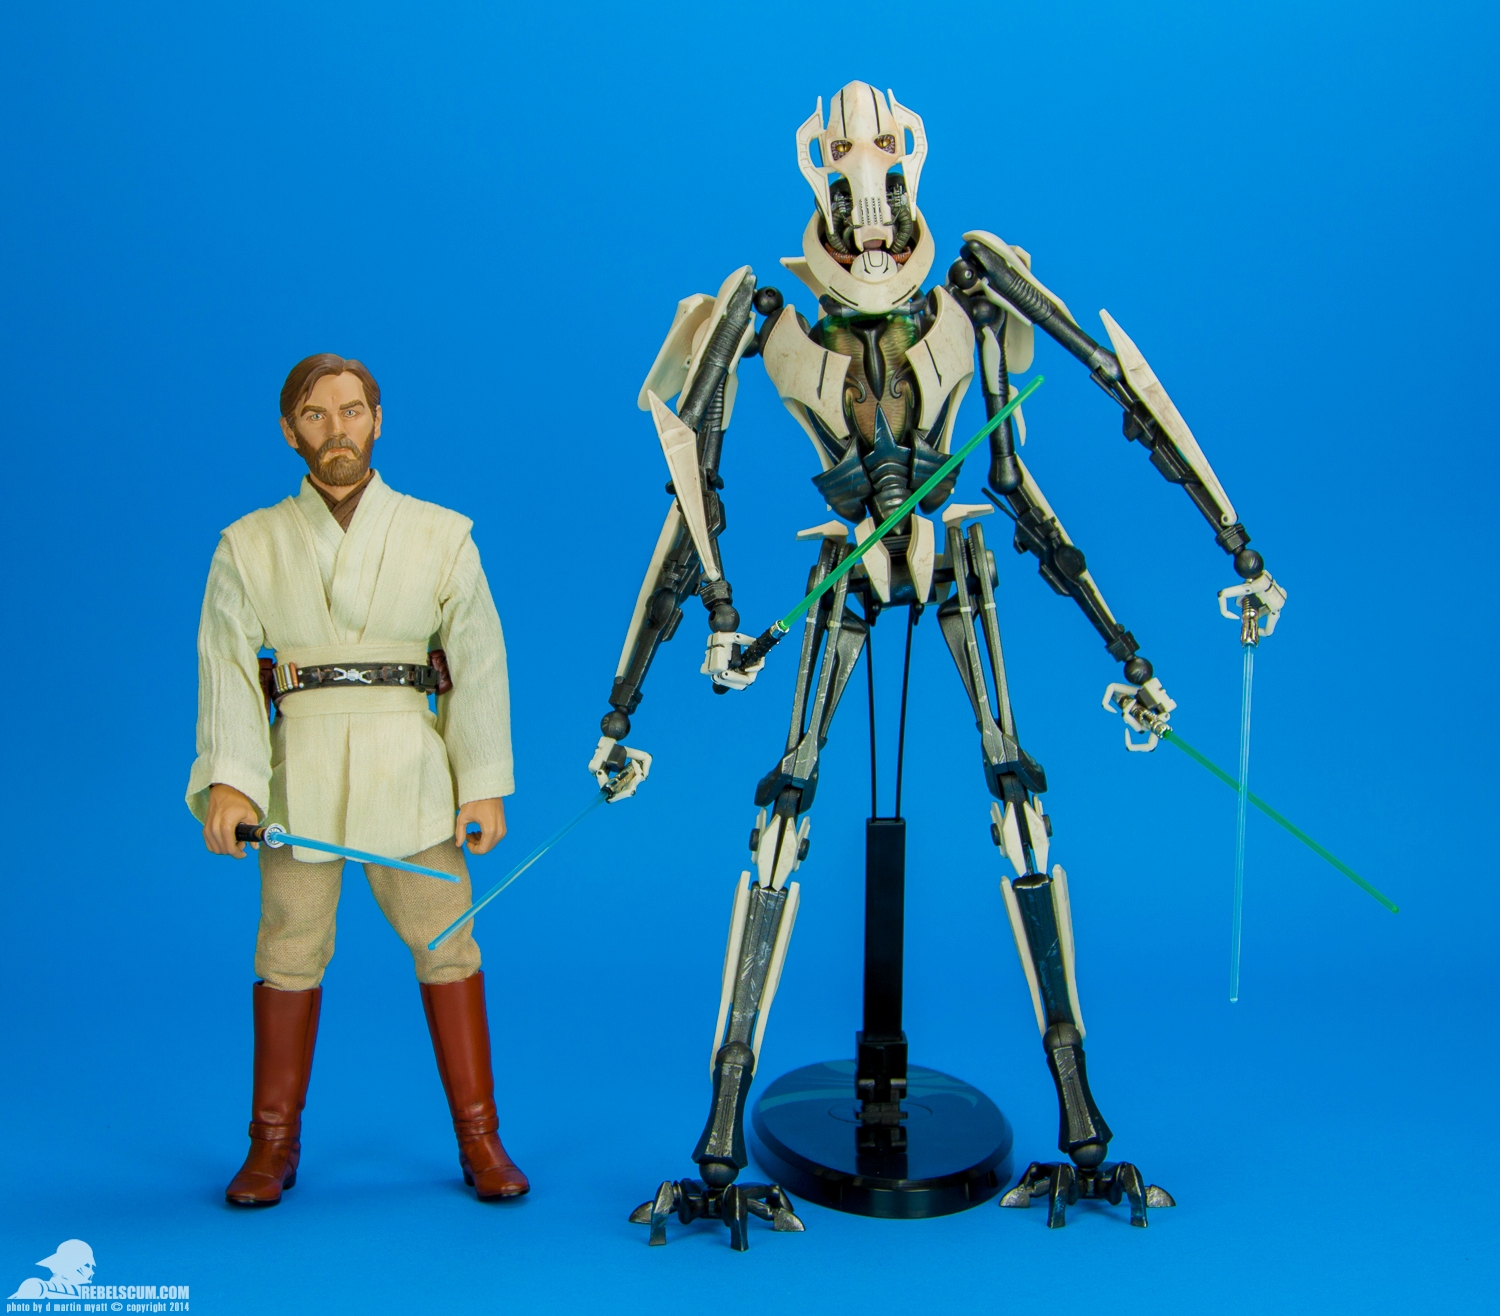 General-Grievous-Sixth-Scale-Figure-Sideshow-Collectibles-026.jpg